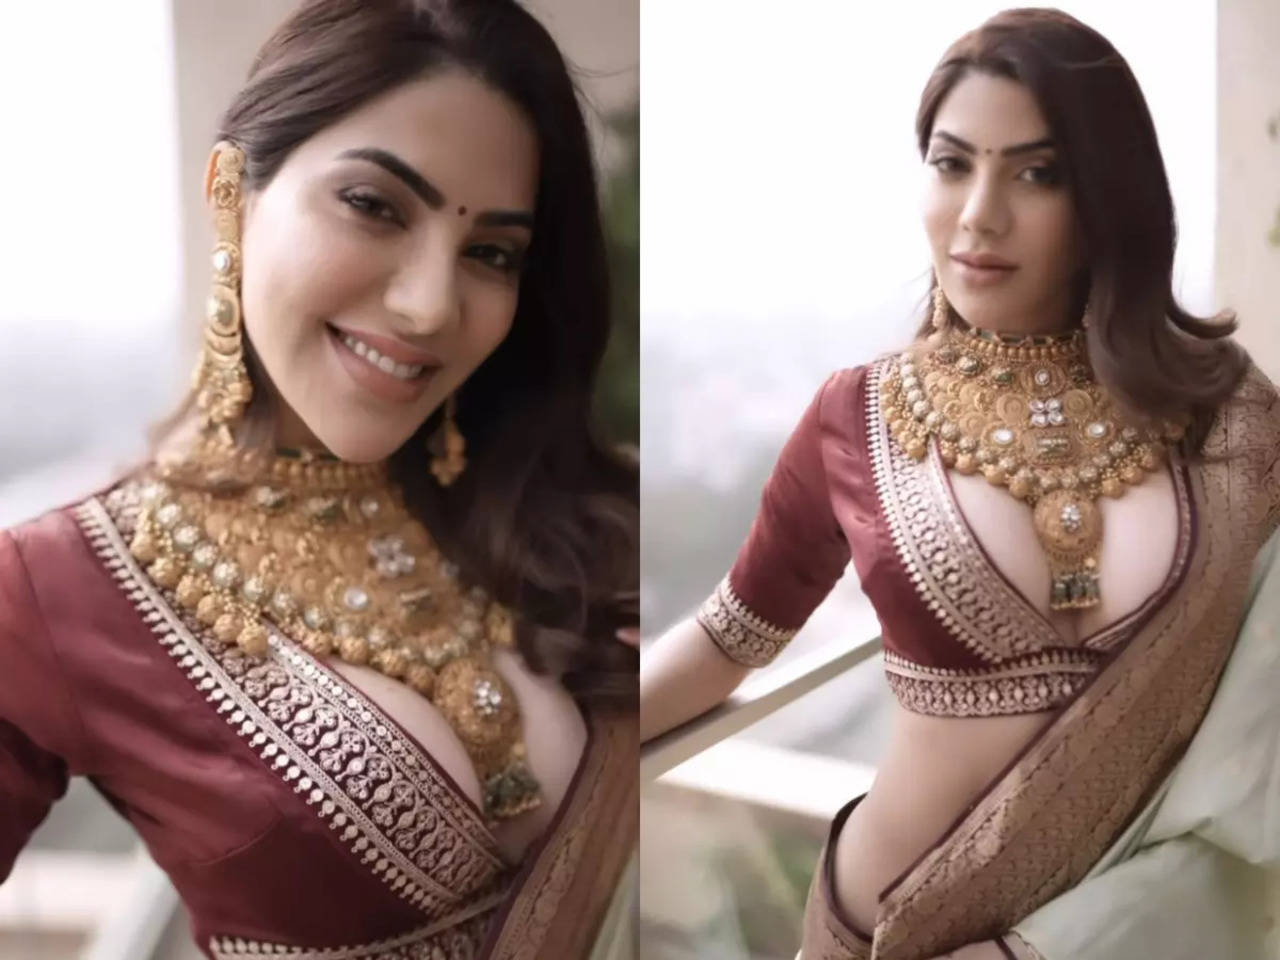 American Saree Girl Sex Vedios - Nikki Tamboli Latest Video: Nikki Tamboli gives Indian saree a twist by  sporting blouse with plunging neckline and heavy jewellery, See PHOTOS | -  Times of India